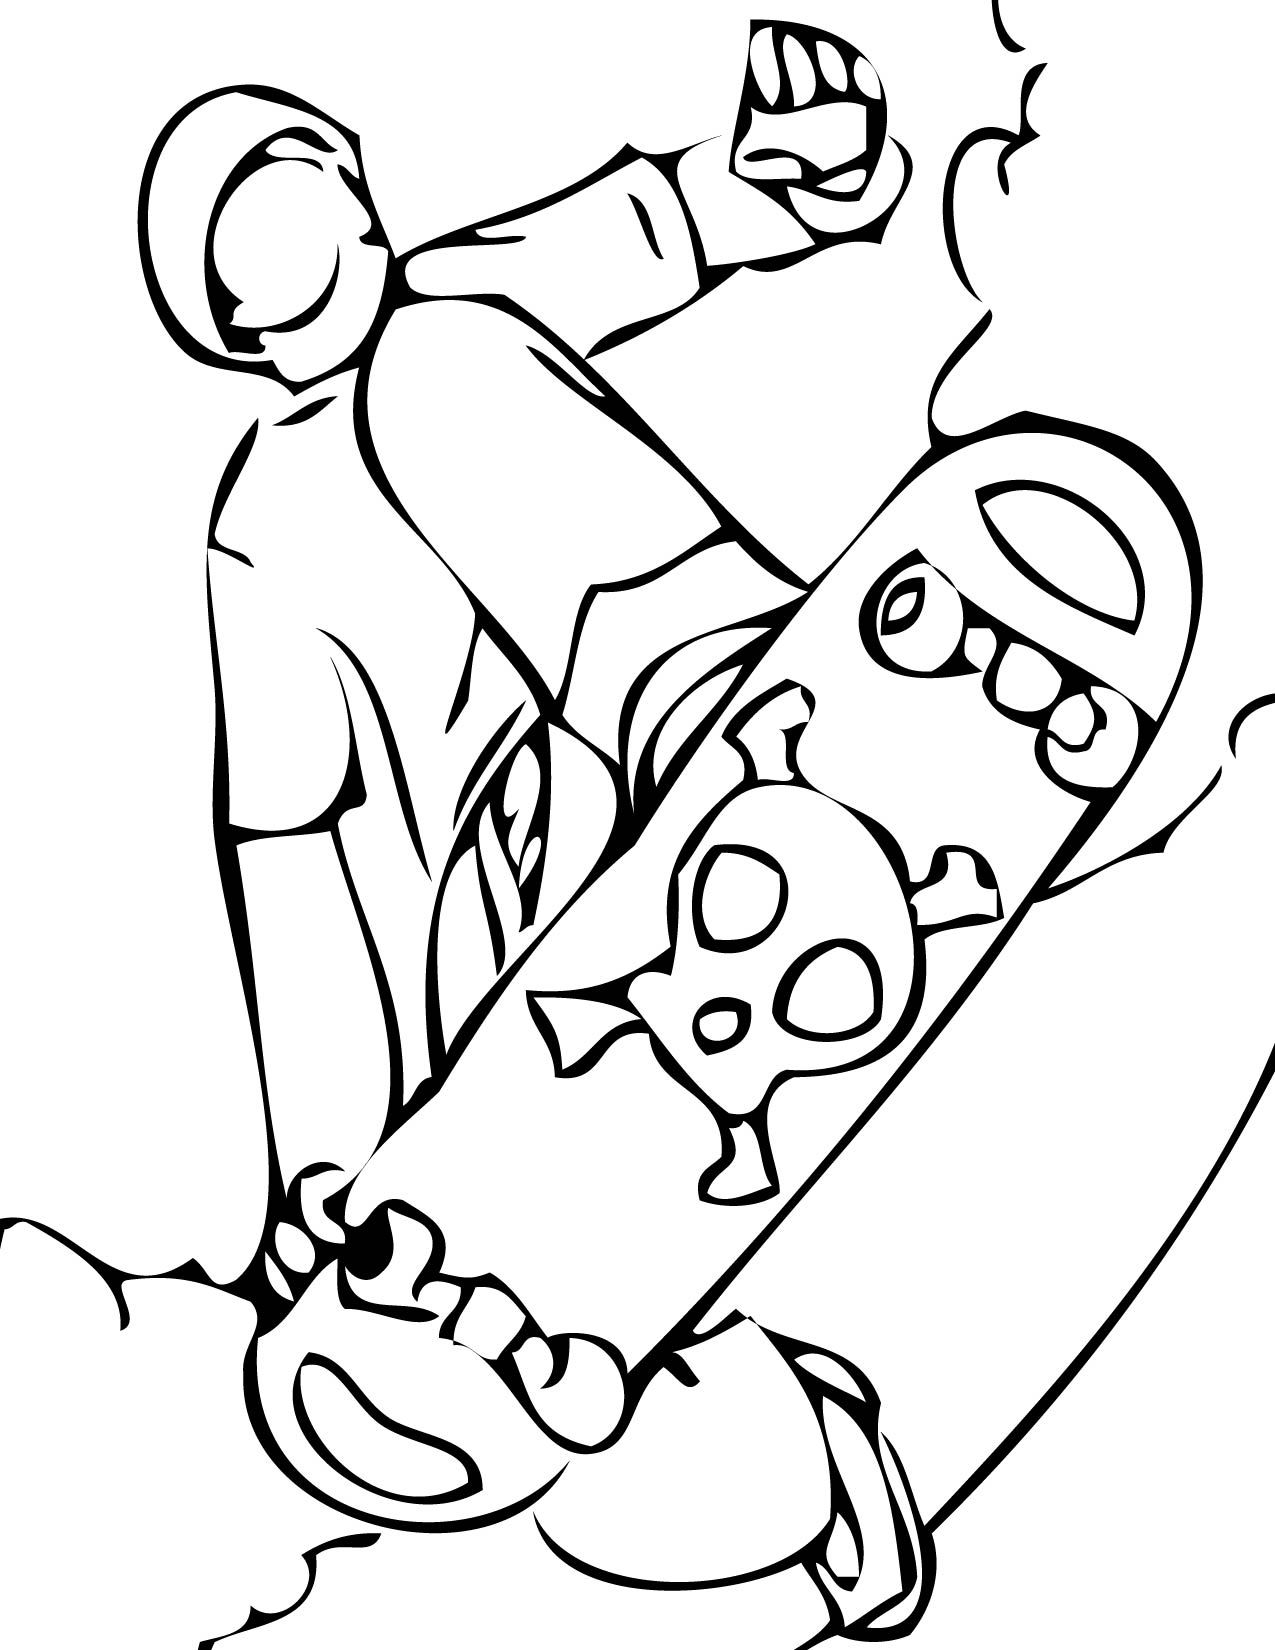 skate clipart colouring page